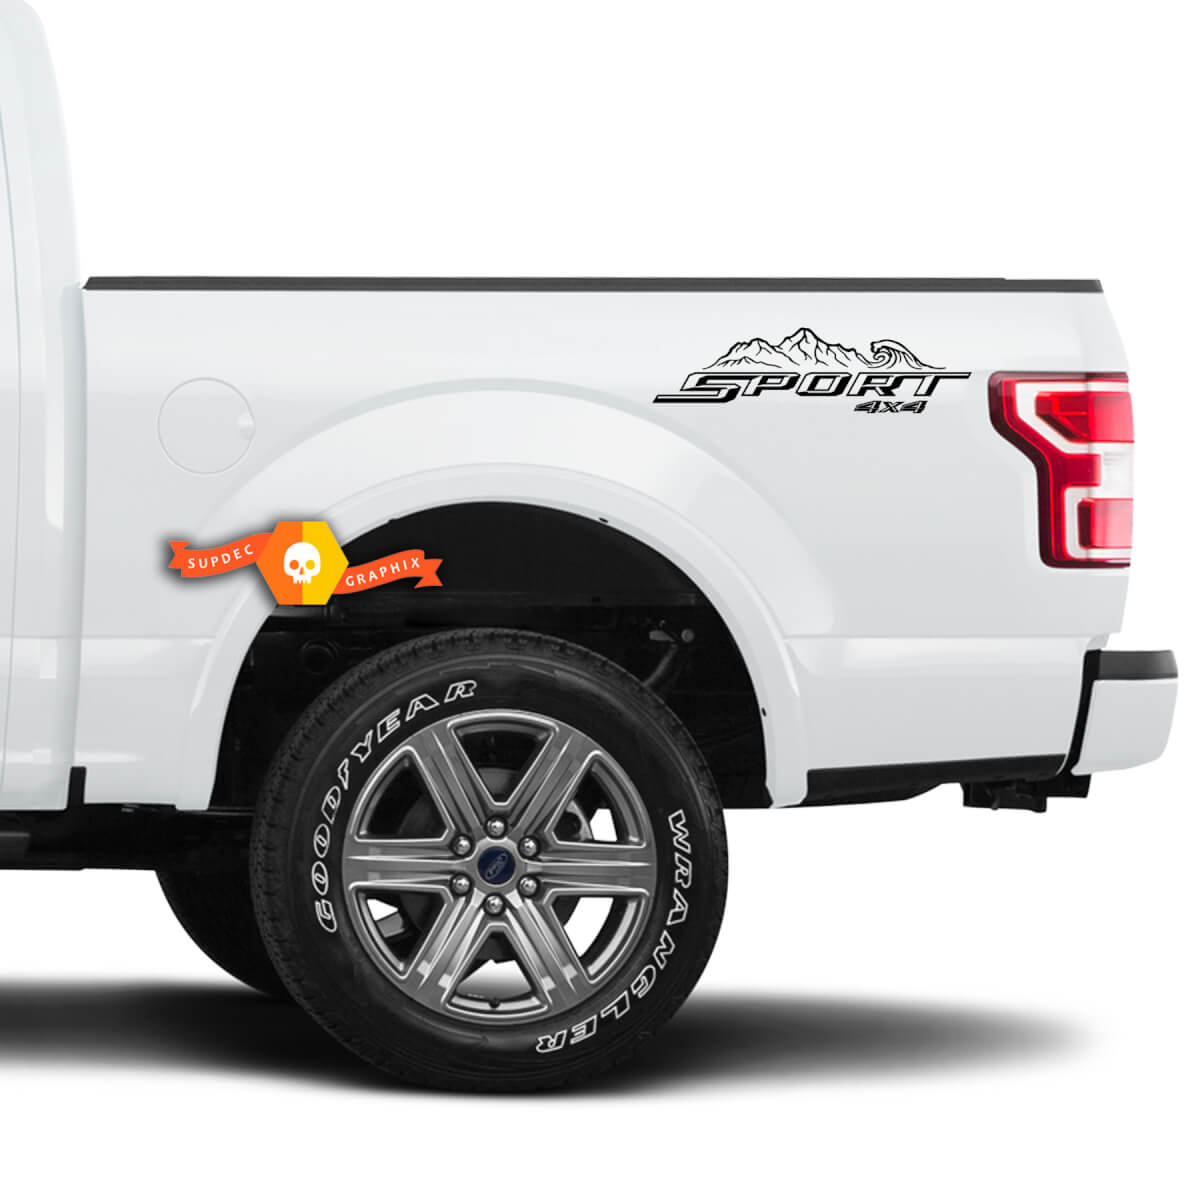 Pair Sport 4X4 Mountain Wave Decals For Ford F150 F250 F350 Super Duty Truck Sticker Decal Vinyl